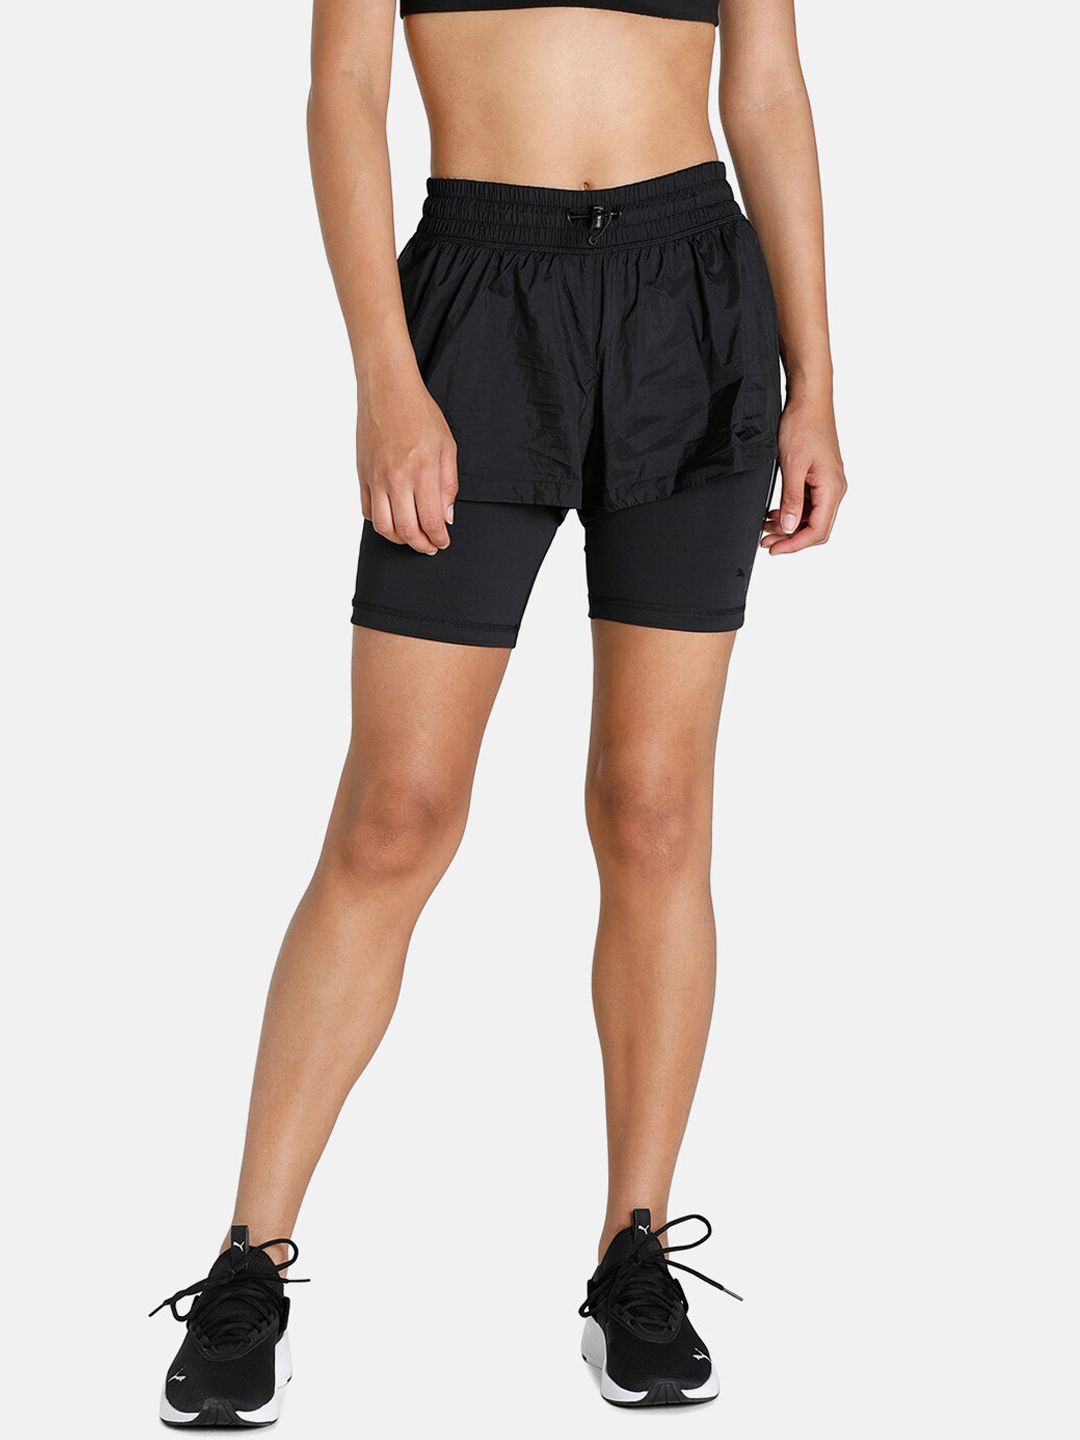 Puma Women Black Training or Gym 2in1 Woven Sports Shorts Price in India